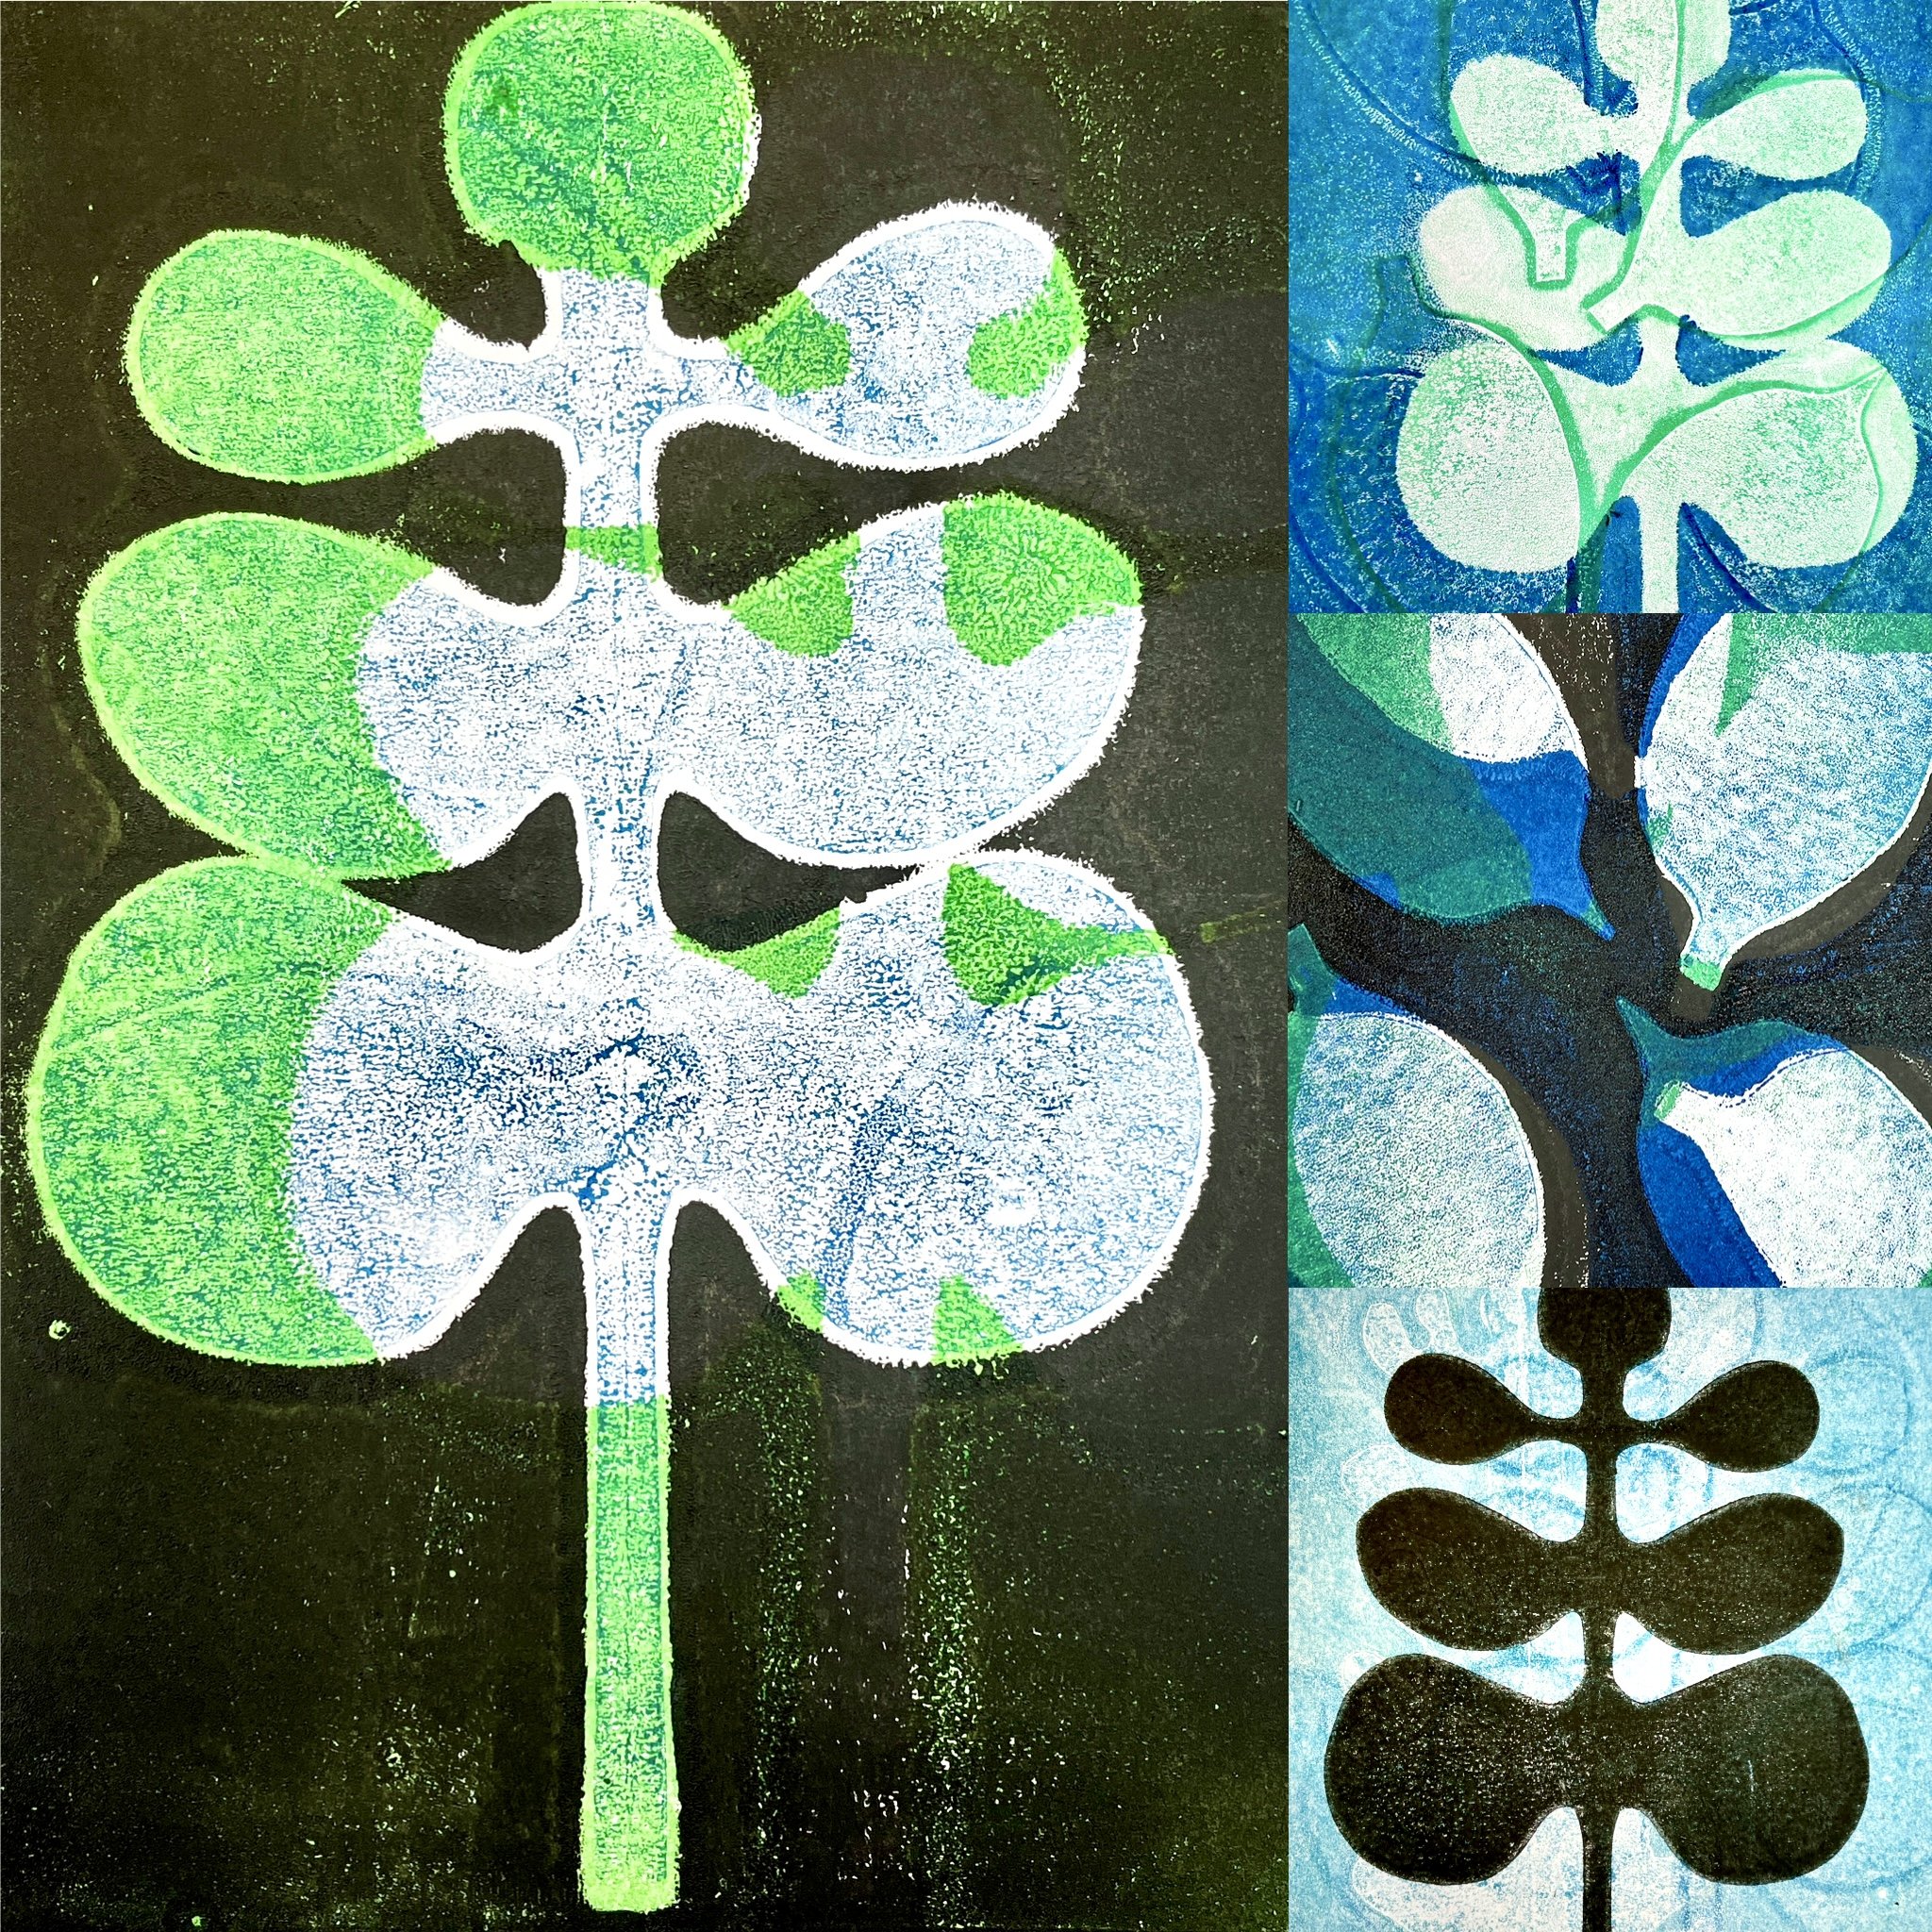 Artful Prints inspired by Matisse